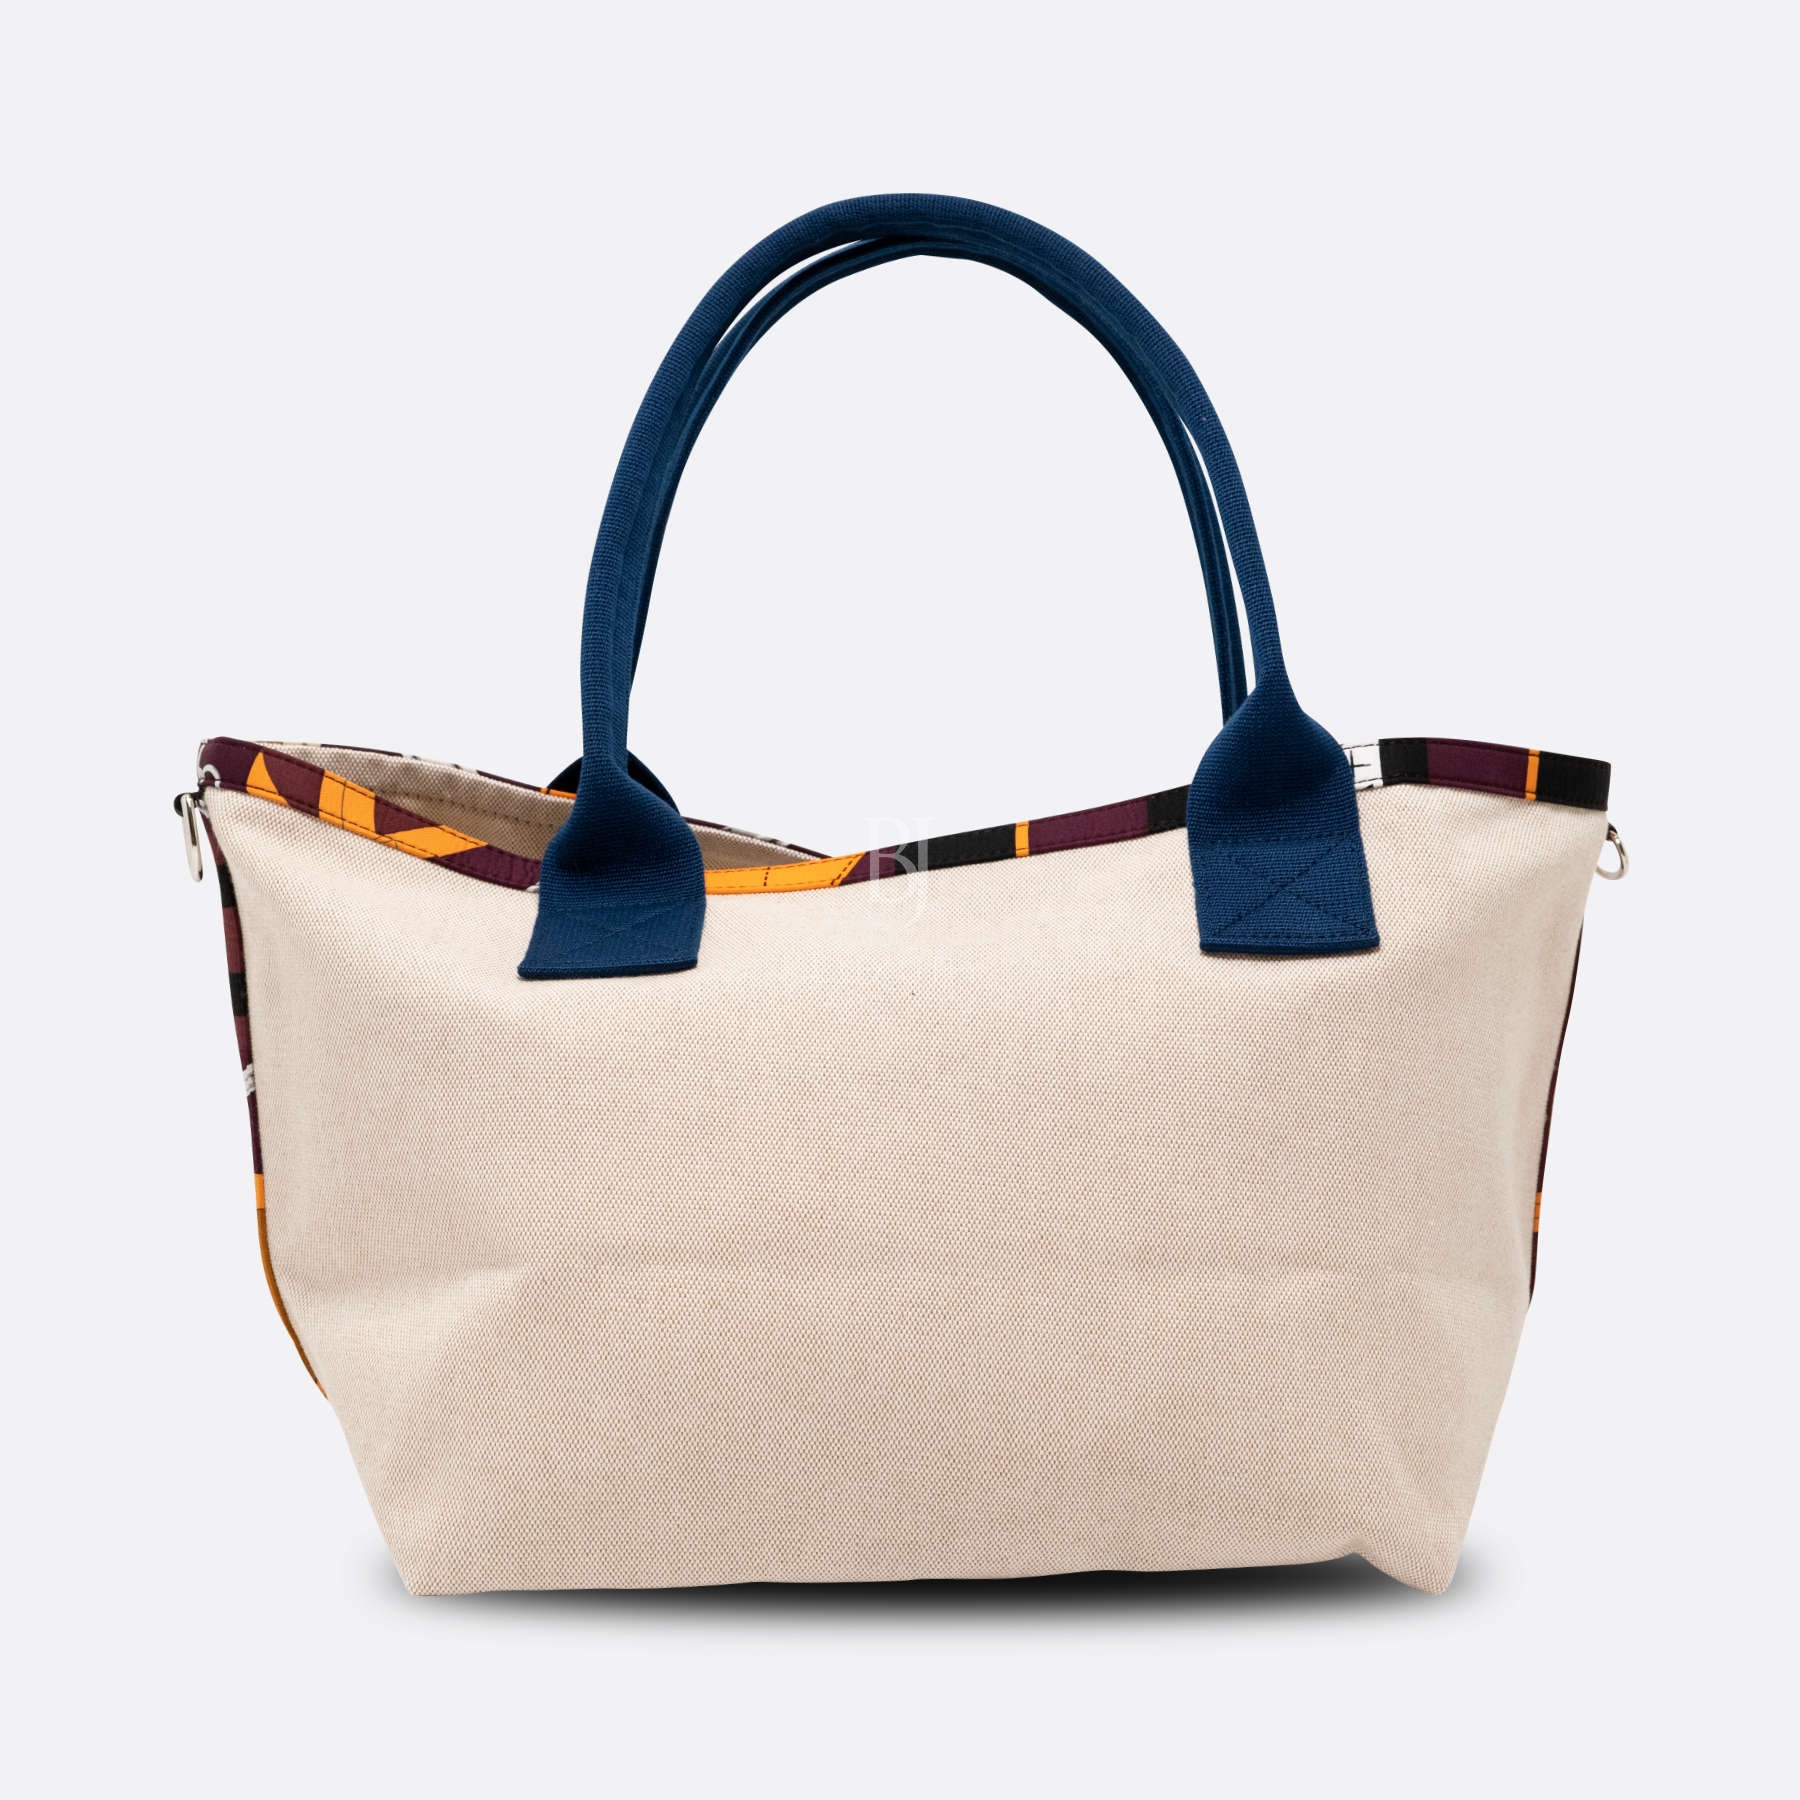 HERMES-PETITH-28-NATURAL-CANVAS-4756 front.jpg